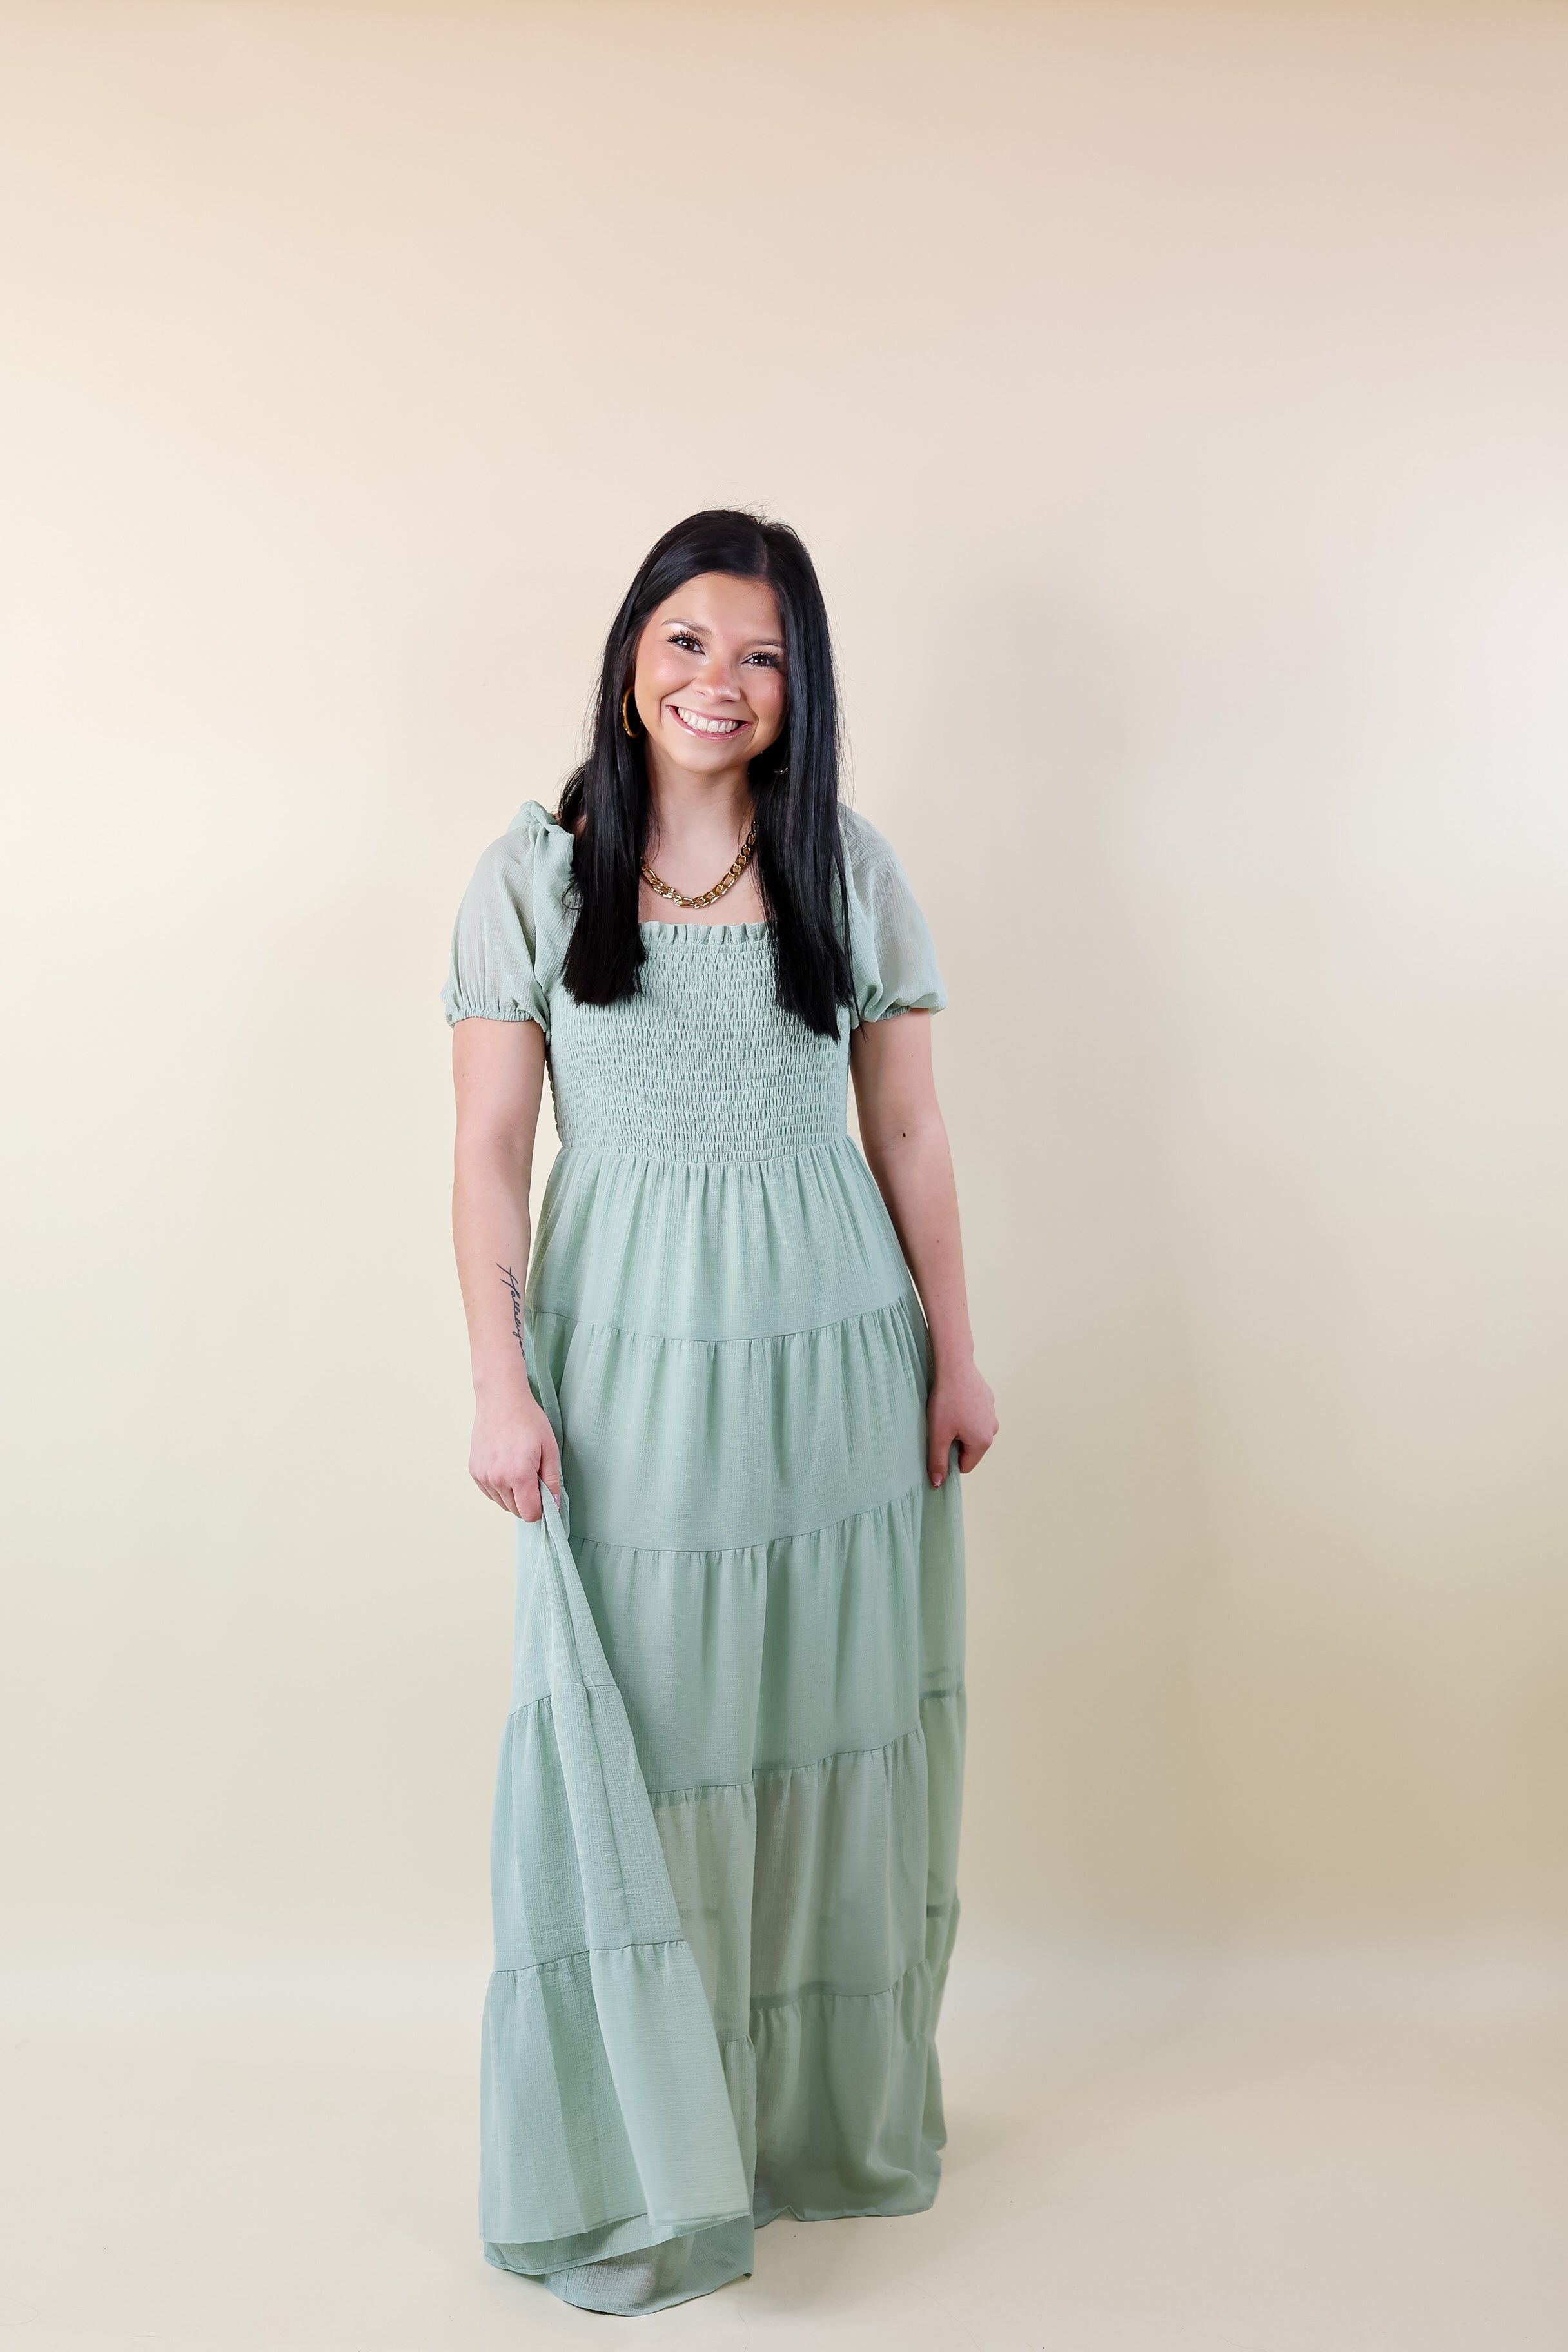 Honeysuckle Love Tiered Maxi Dress with Smocked Bodice in Sage Green - Giddy Up Glamour Boutique